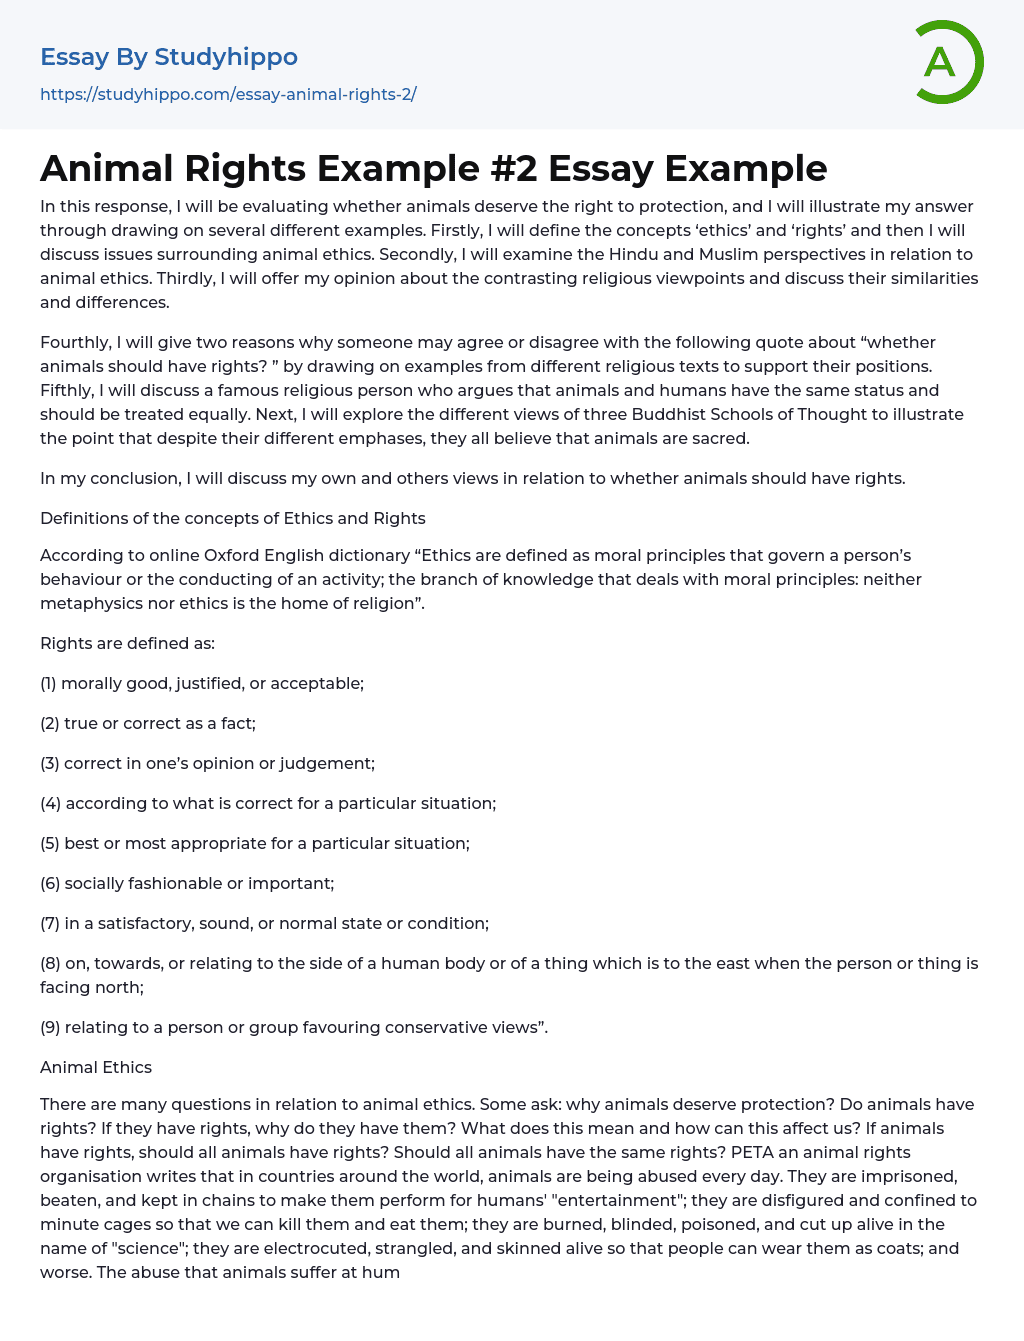 Animal Rights Example #2 Essay Example